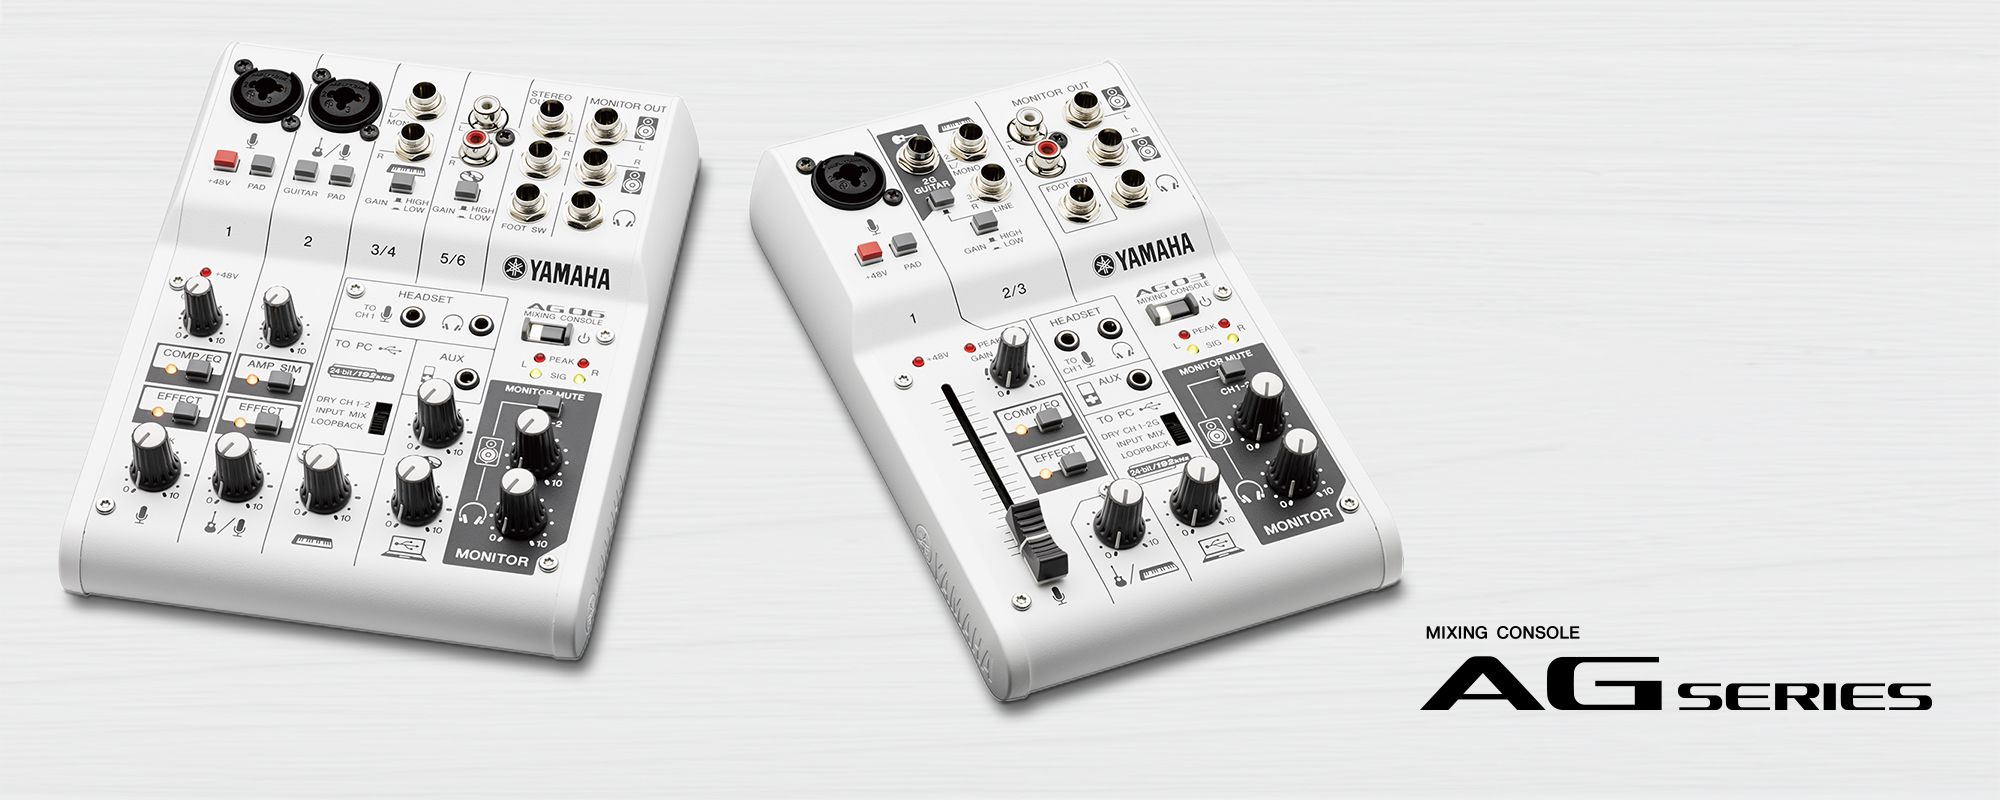 AG06 / AG03 - Overview - Interfaces (FireWire/USB) - Synthesizers 